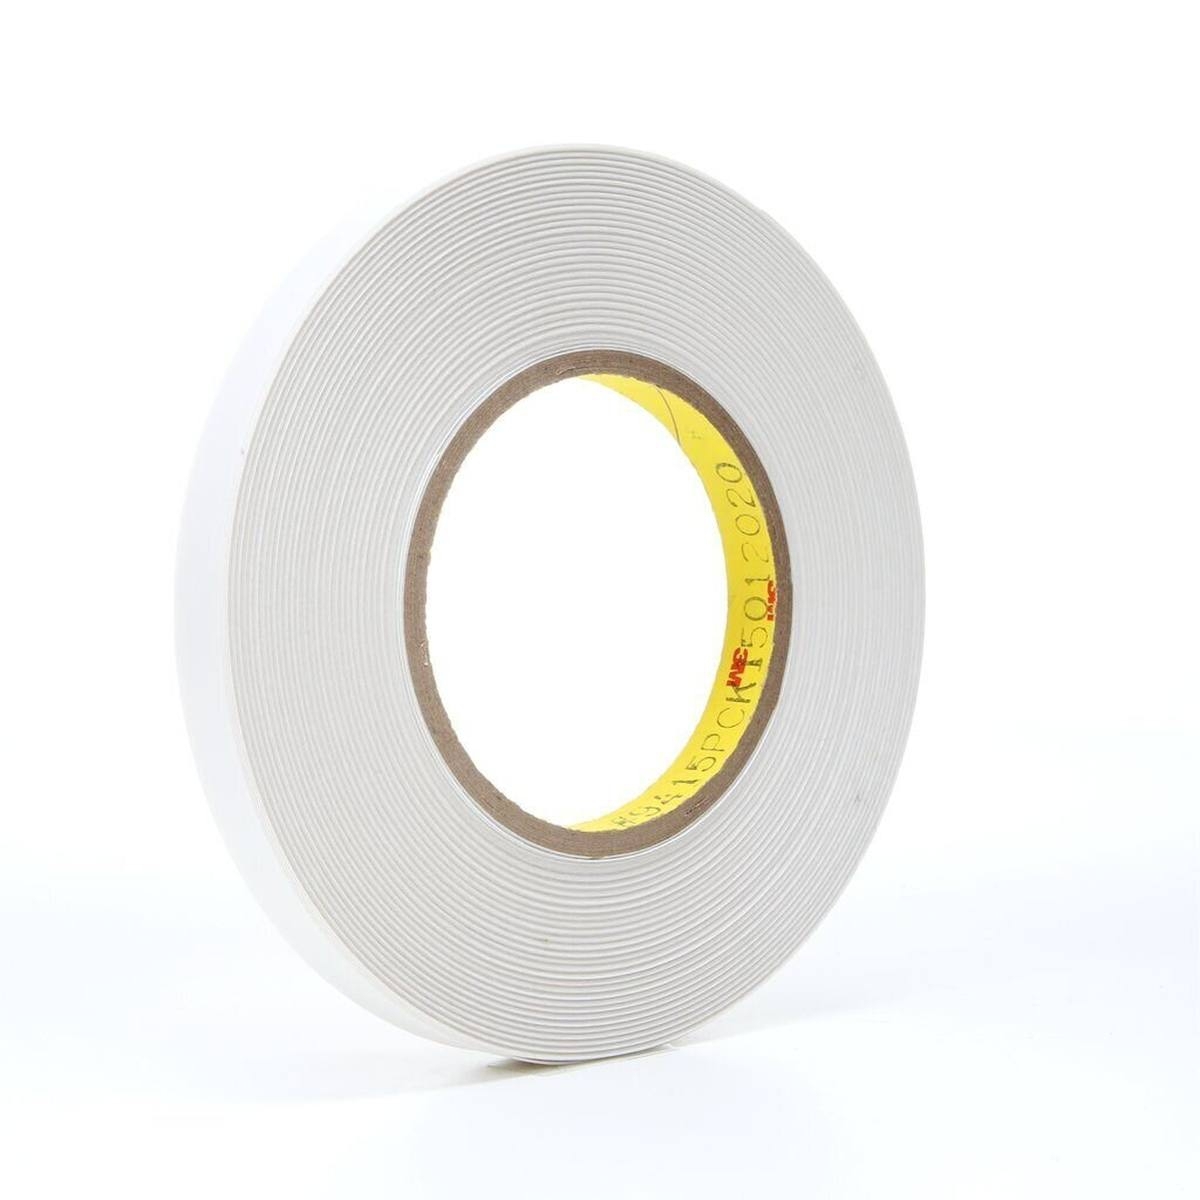 3M Double-sided adhesive tape with polyester backing 9415PC, translucent, 6 mm x 66 m, 0.05 mm